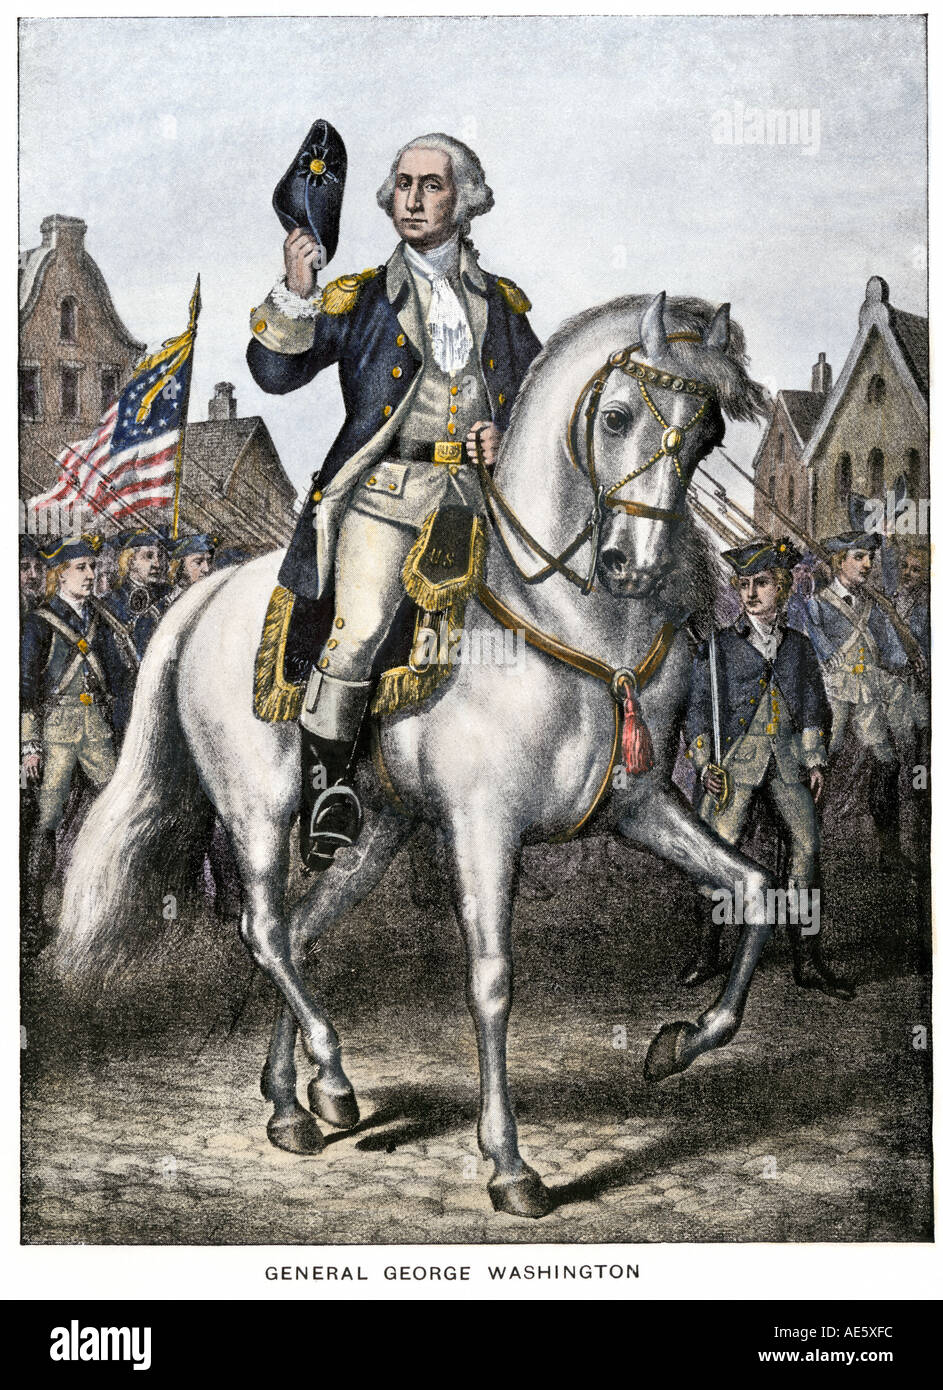 General George Washington leading troops on parade American Revolution. Hand-colored halftone of an illustration Stock Photo